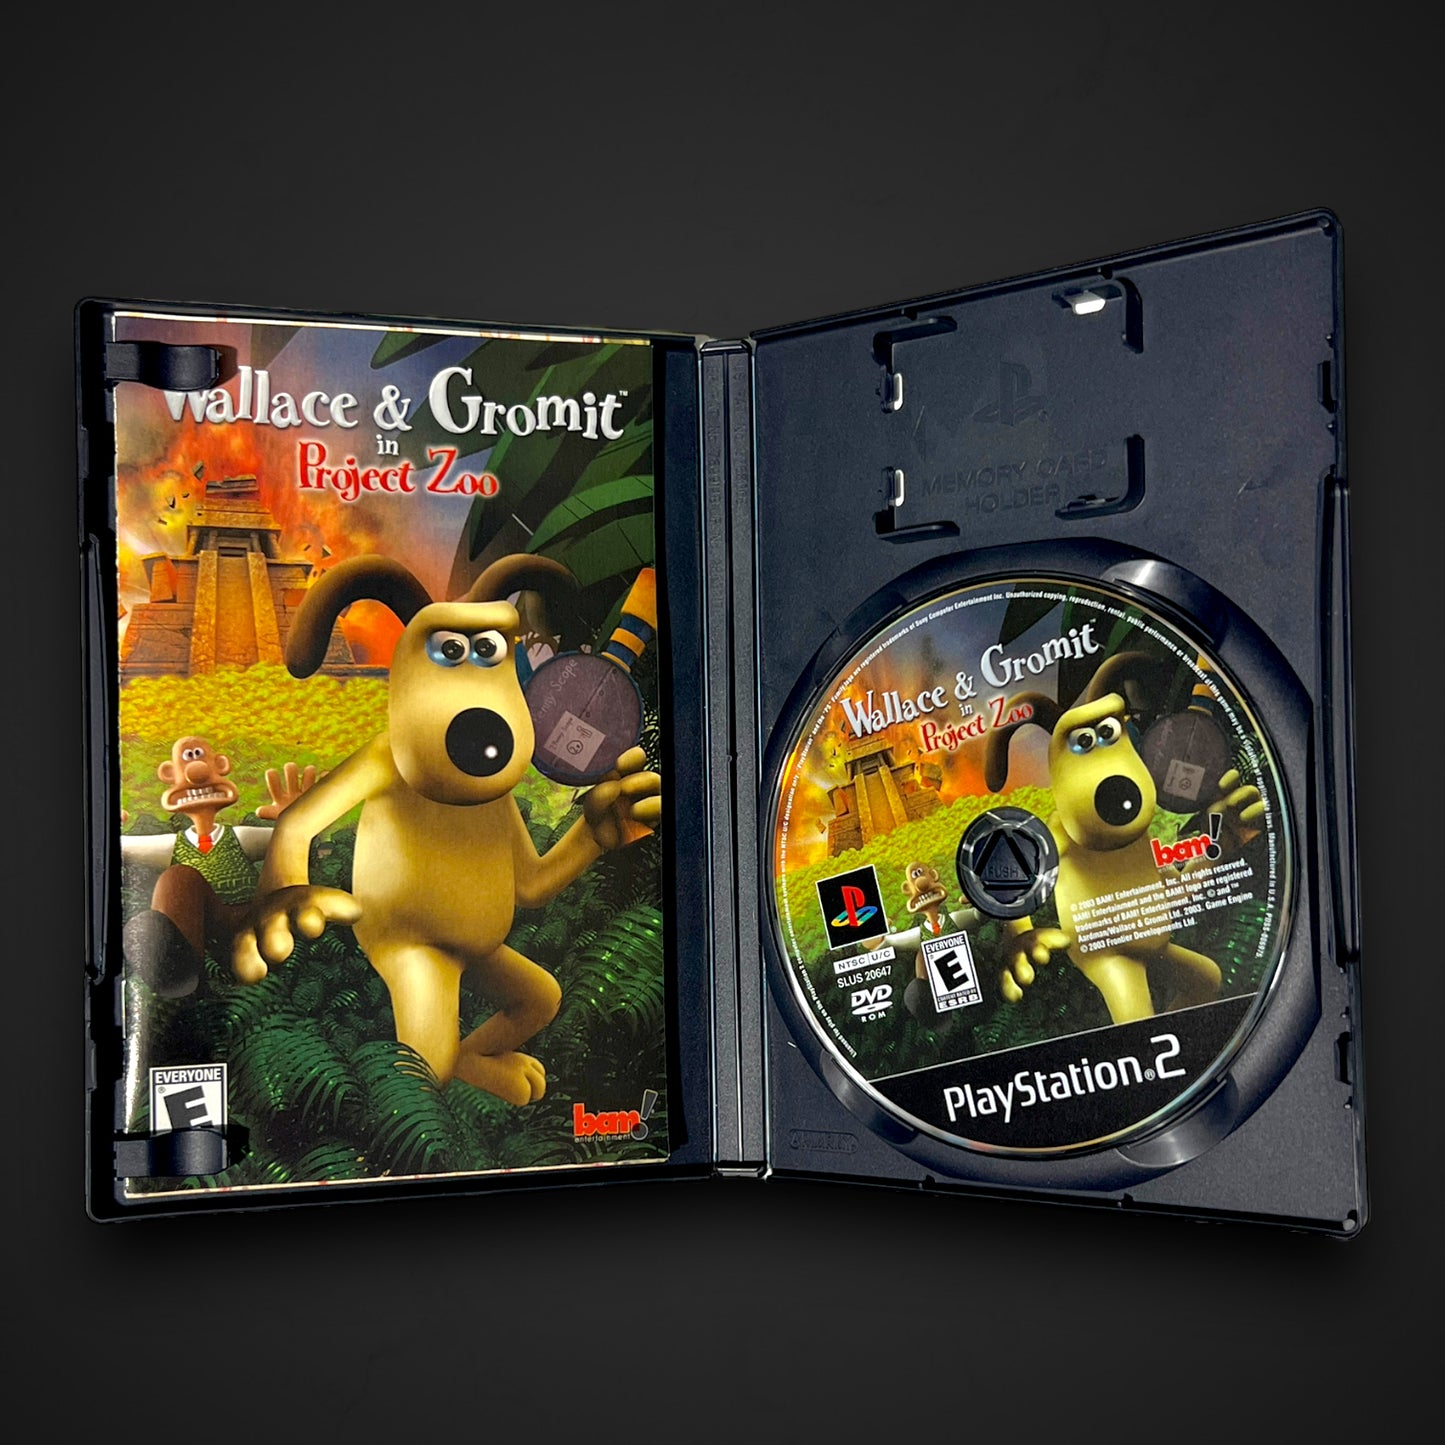 Wallace & Gromit in Project Zoo (Sony PlayStation 2, 2003)